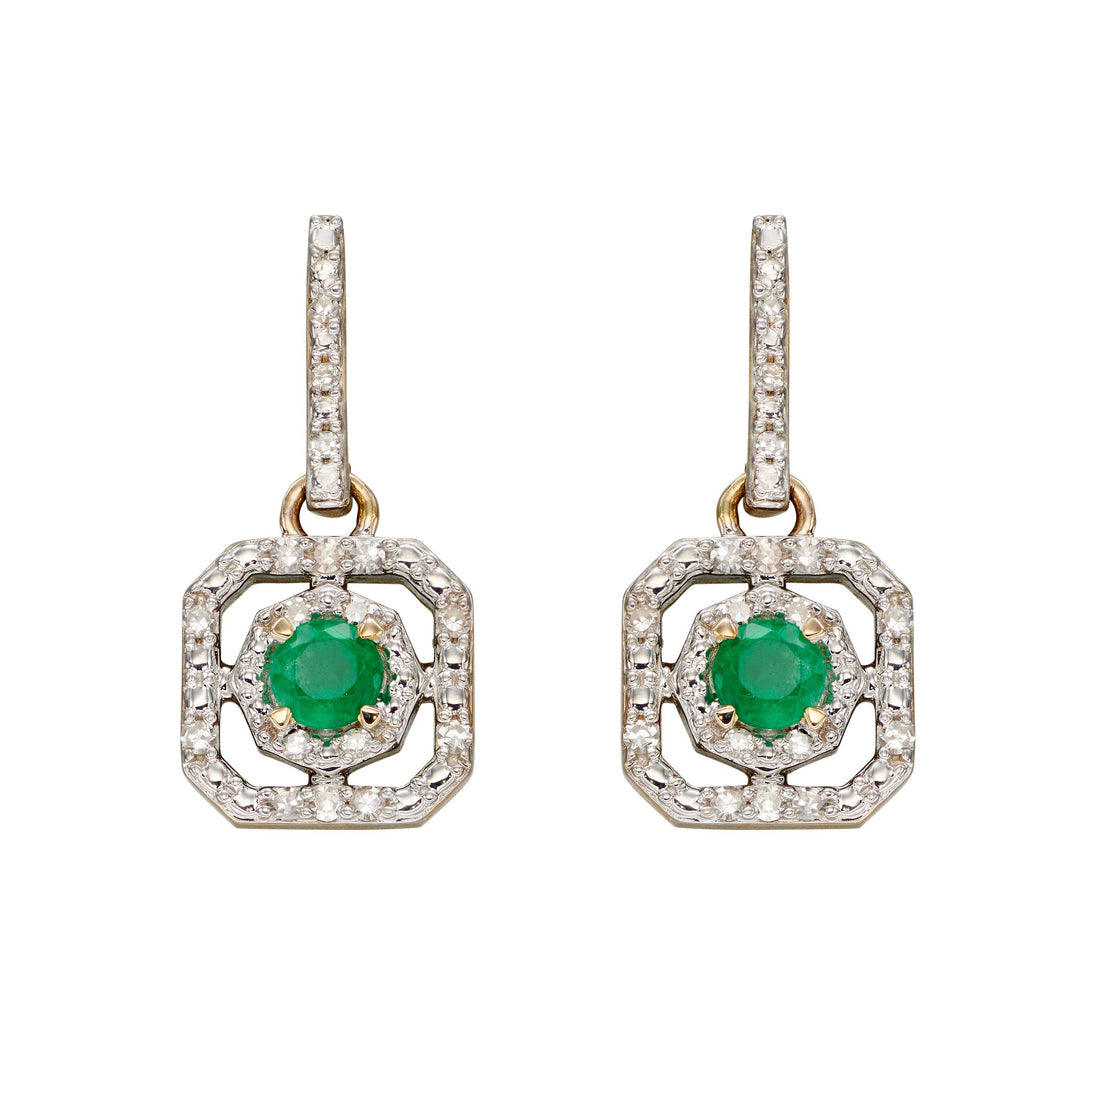 Square Emerald Art Deco Drop Earrings in 9ct Yellow Gold